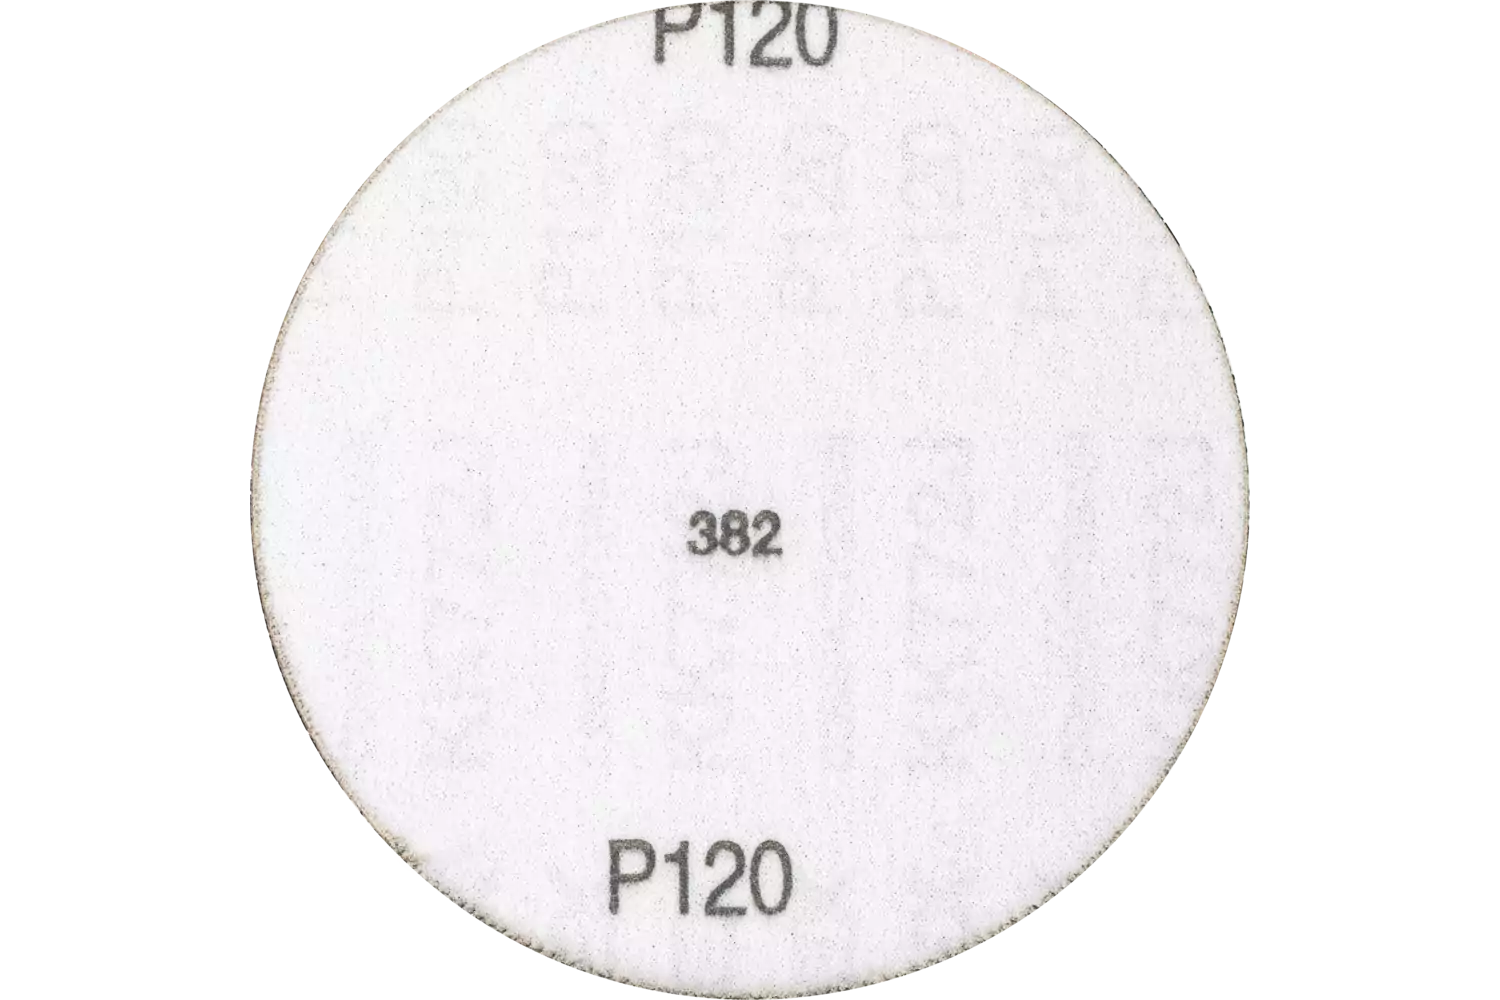 Compact grain self-adhesive disc KR dia. 125 mm A120 CK for fine grinding with an angle grinder 3